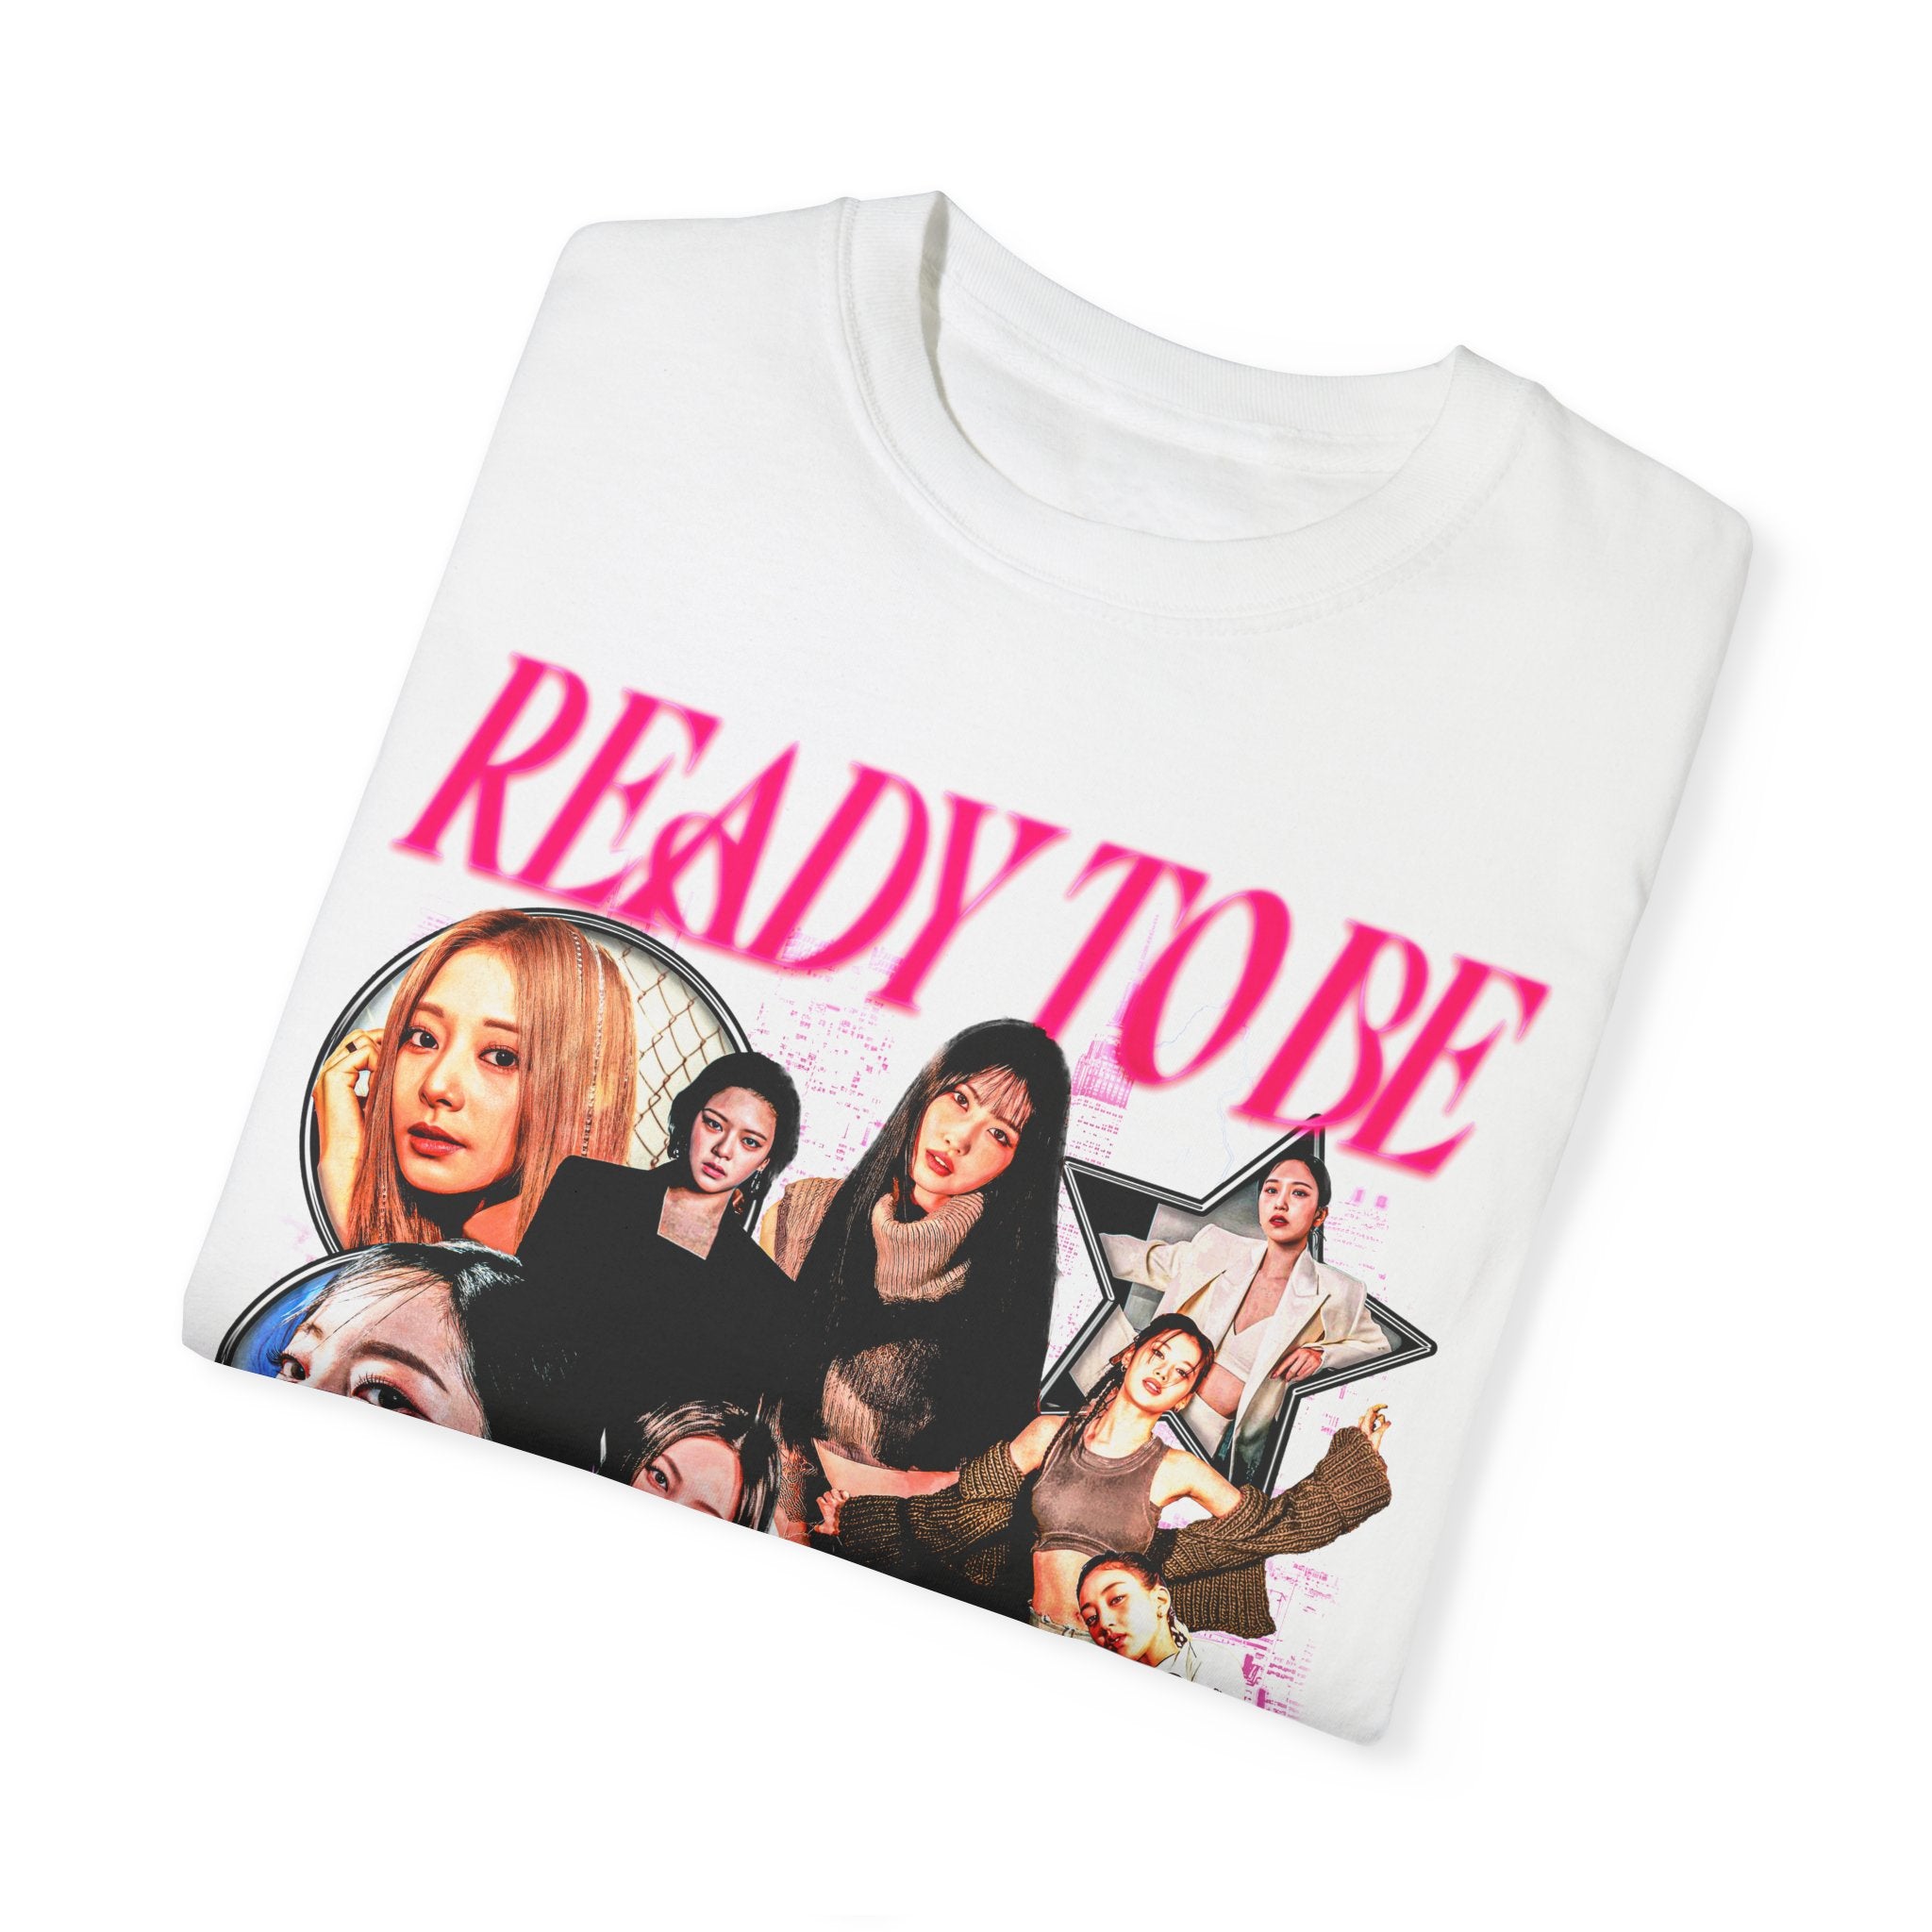 TWICE READY TO BE Unisex Garment-Dyed T-shirt